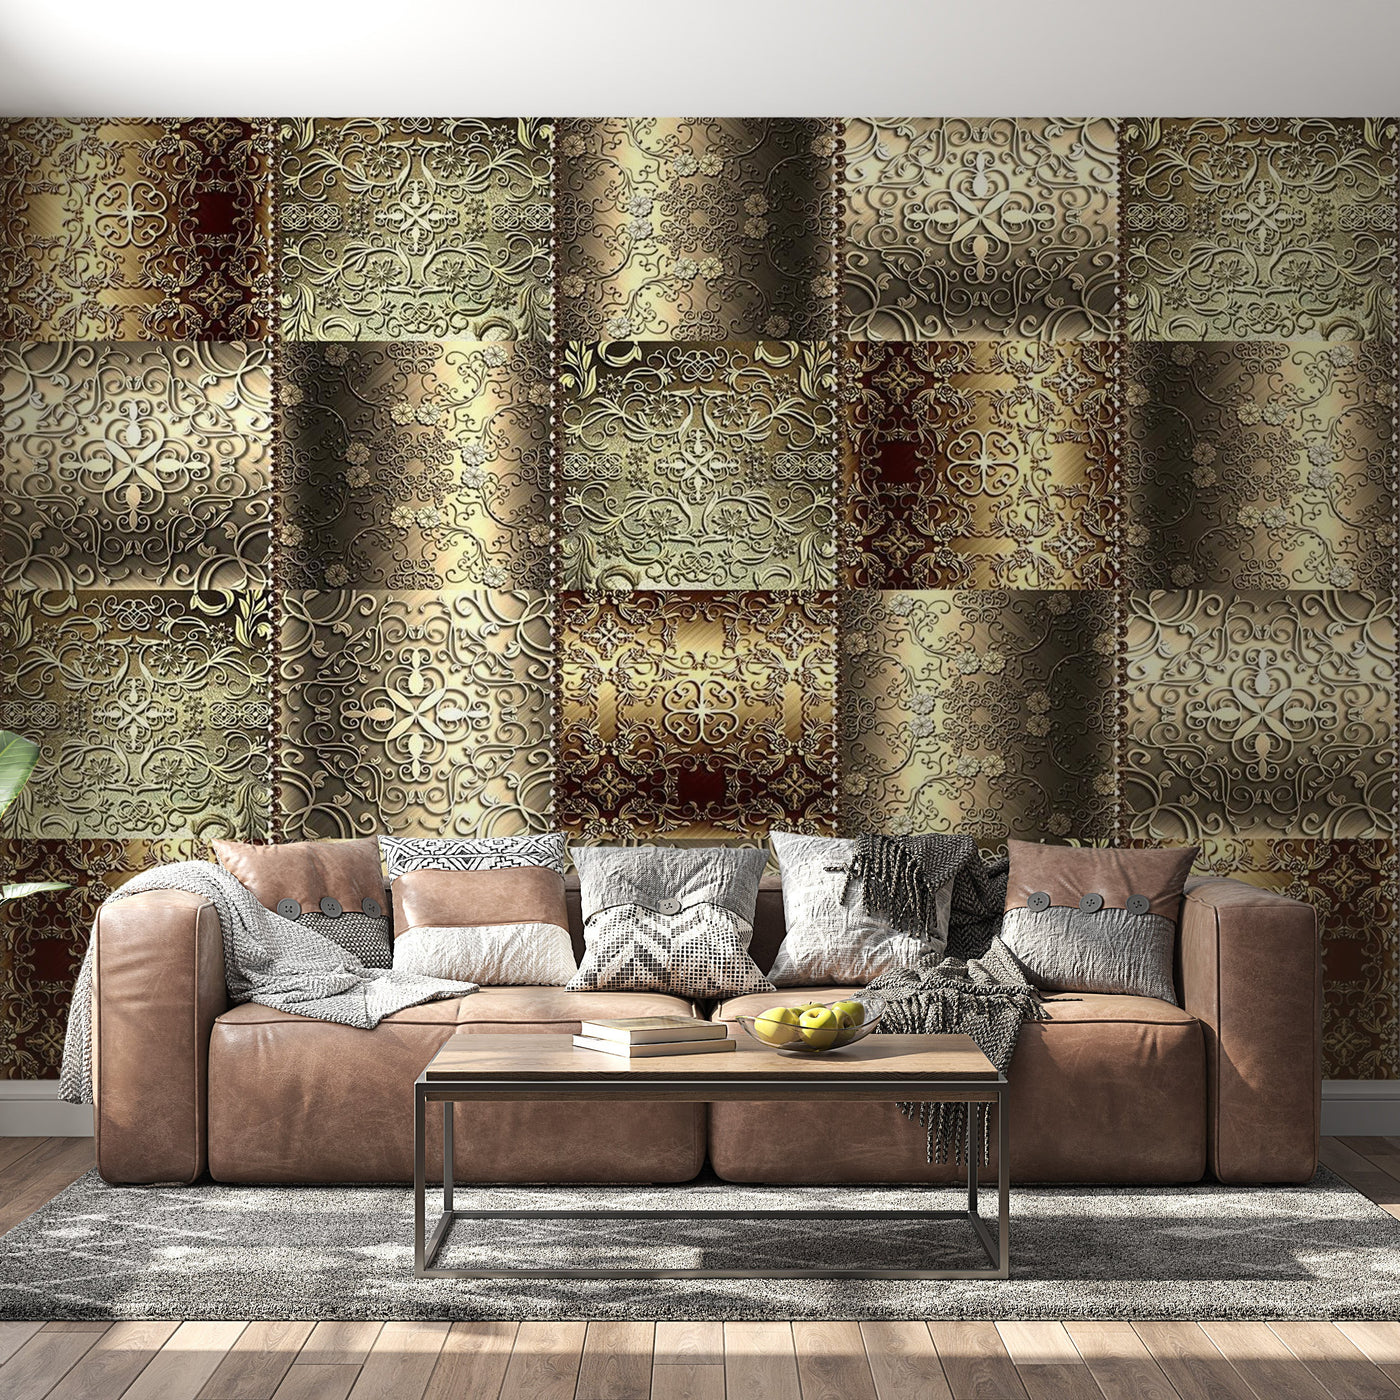 Peel & Stick Wall Mural - Golden Metal Plates - Removable Wall Decals